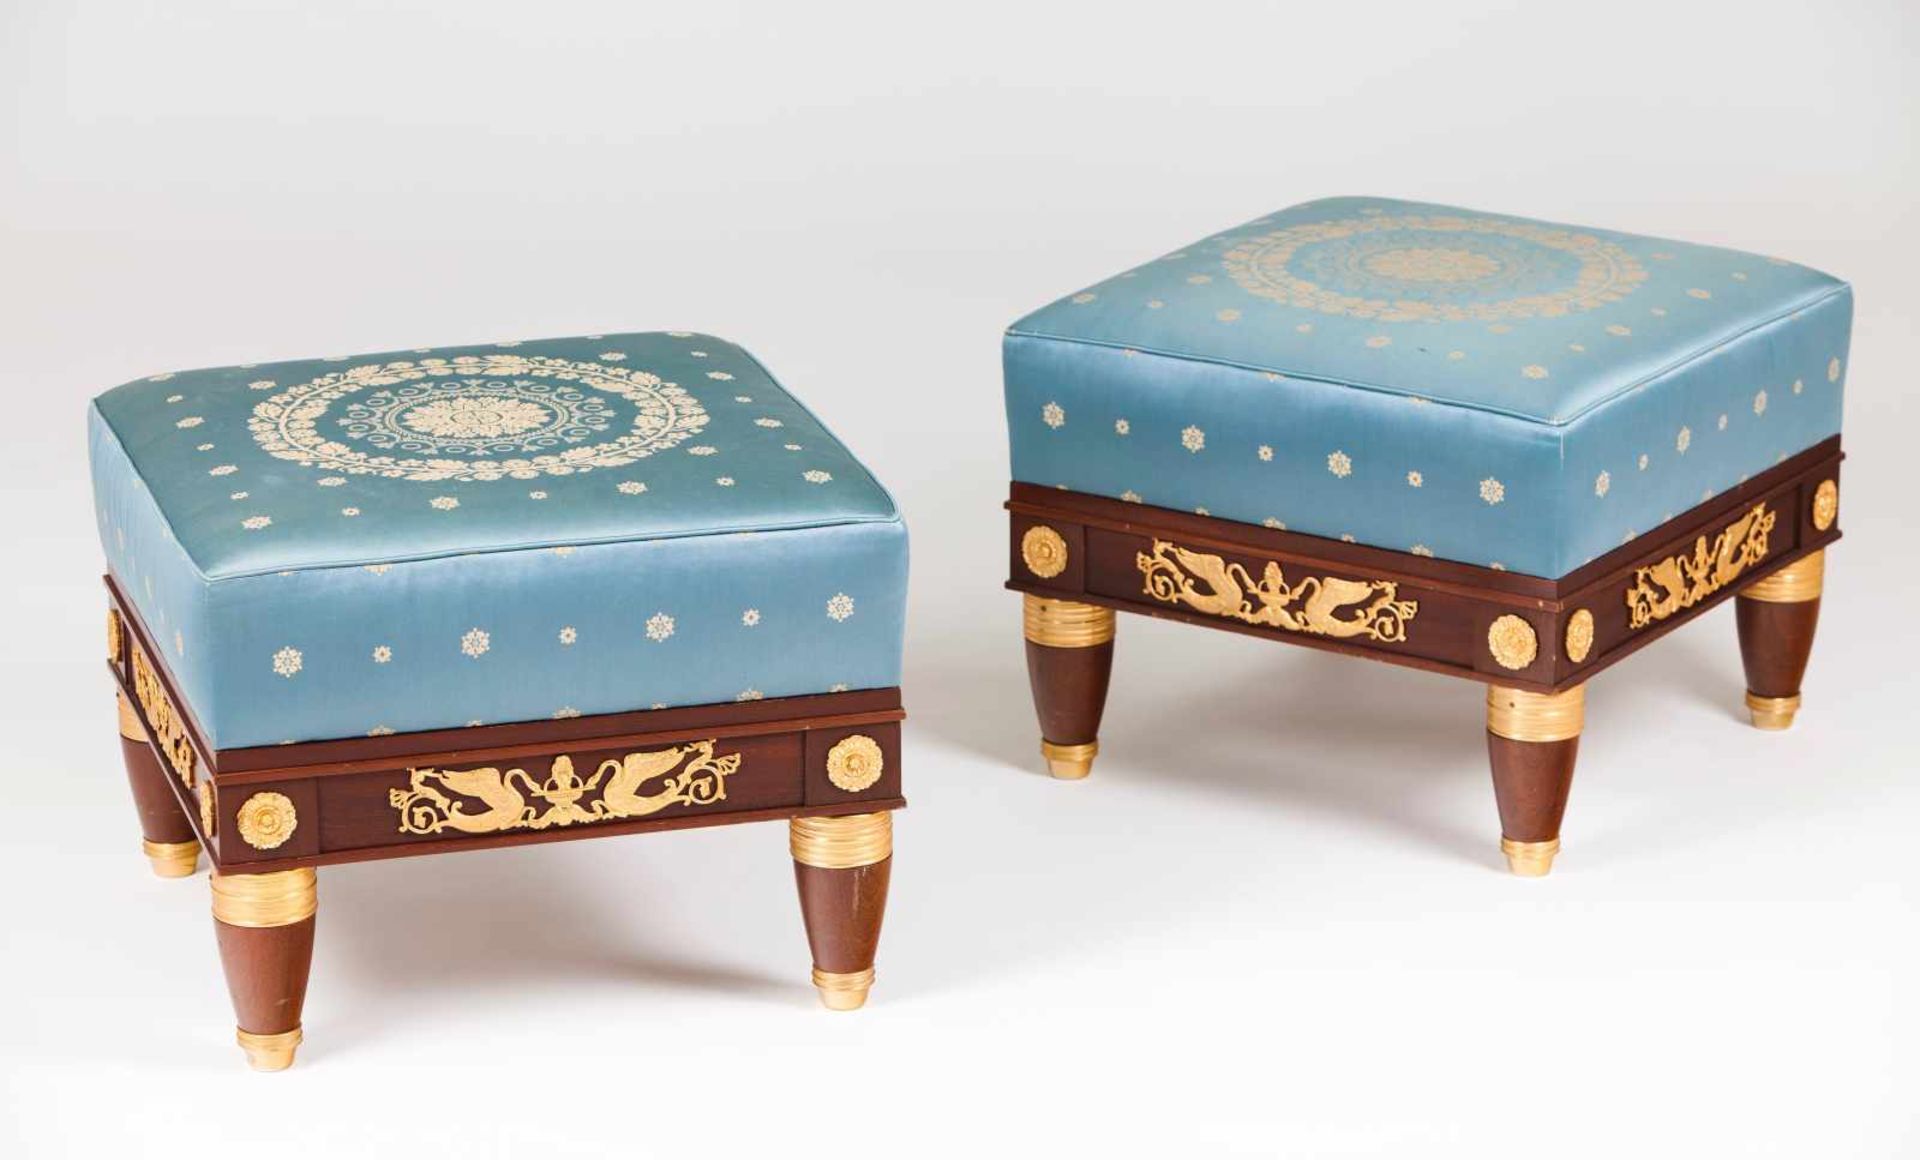 A pair of Empire style stoolsMahoganyGilt metal mounts and silk upholstery20th century47x61x61 cm